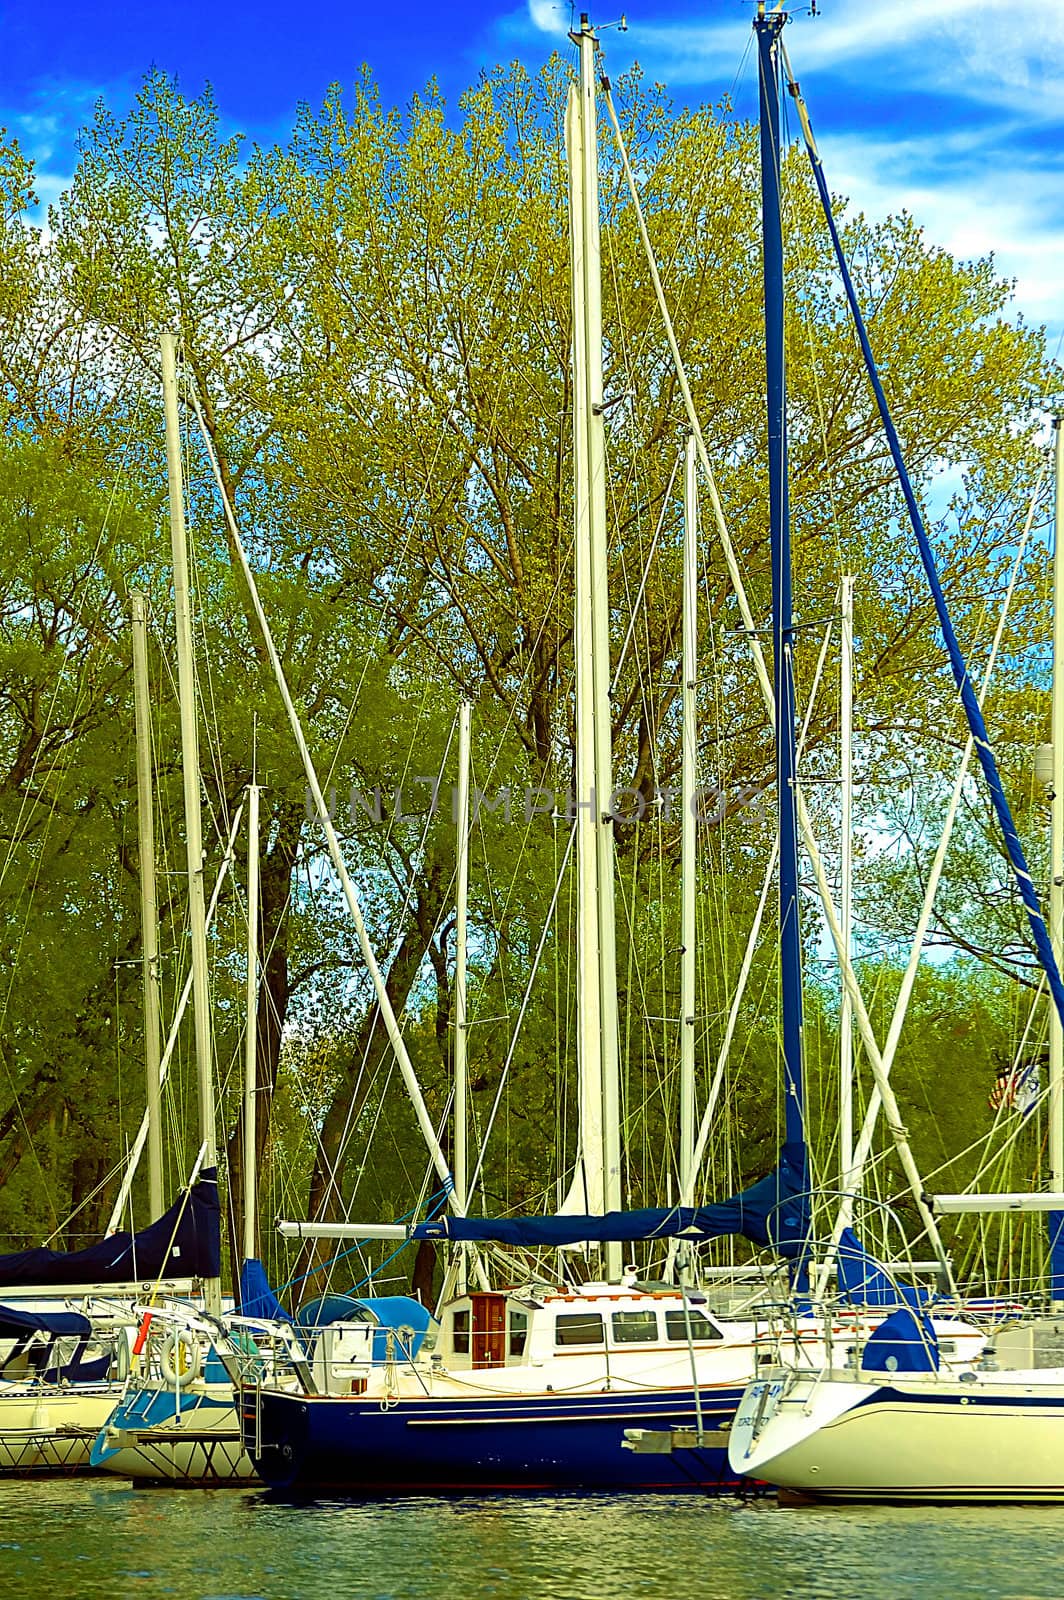  fishing boats ready for sail on a bright sunny day